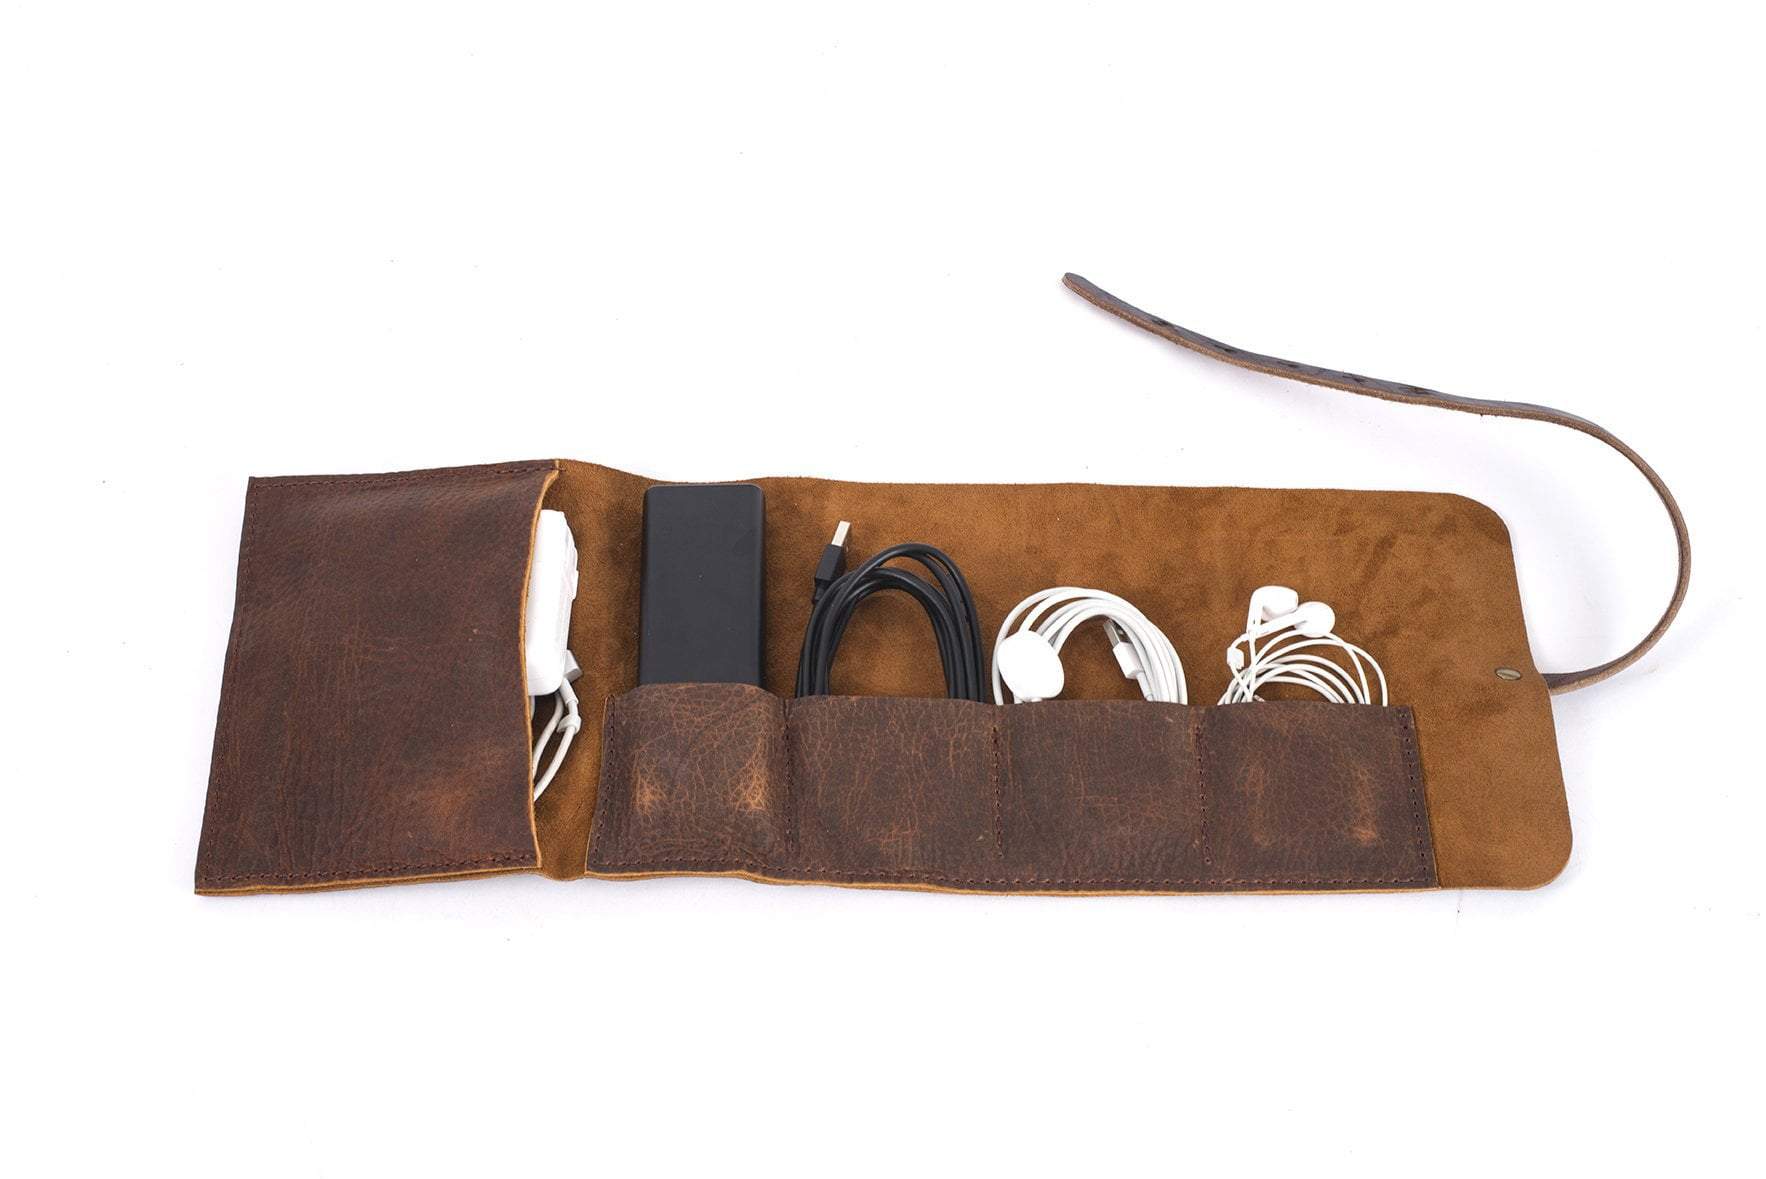 LEATHER CORD ORGANIZER - Go Forth Goods ®